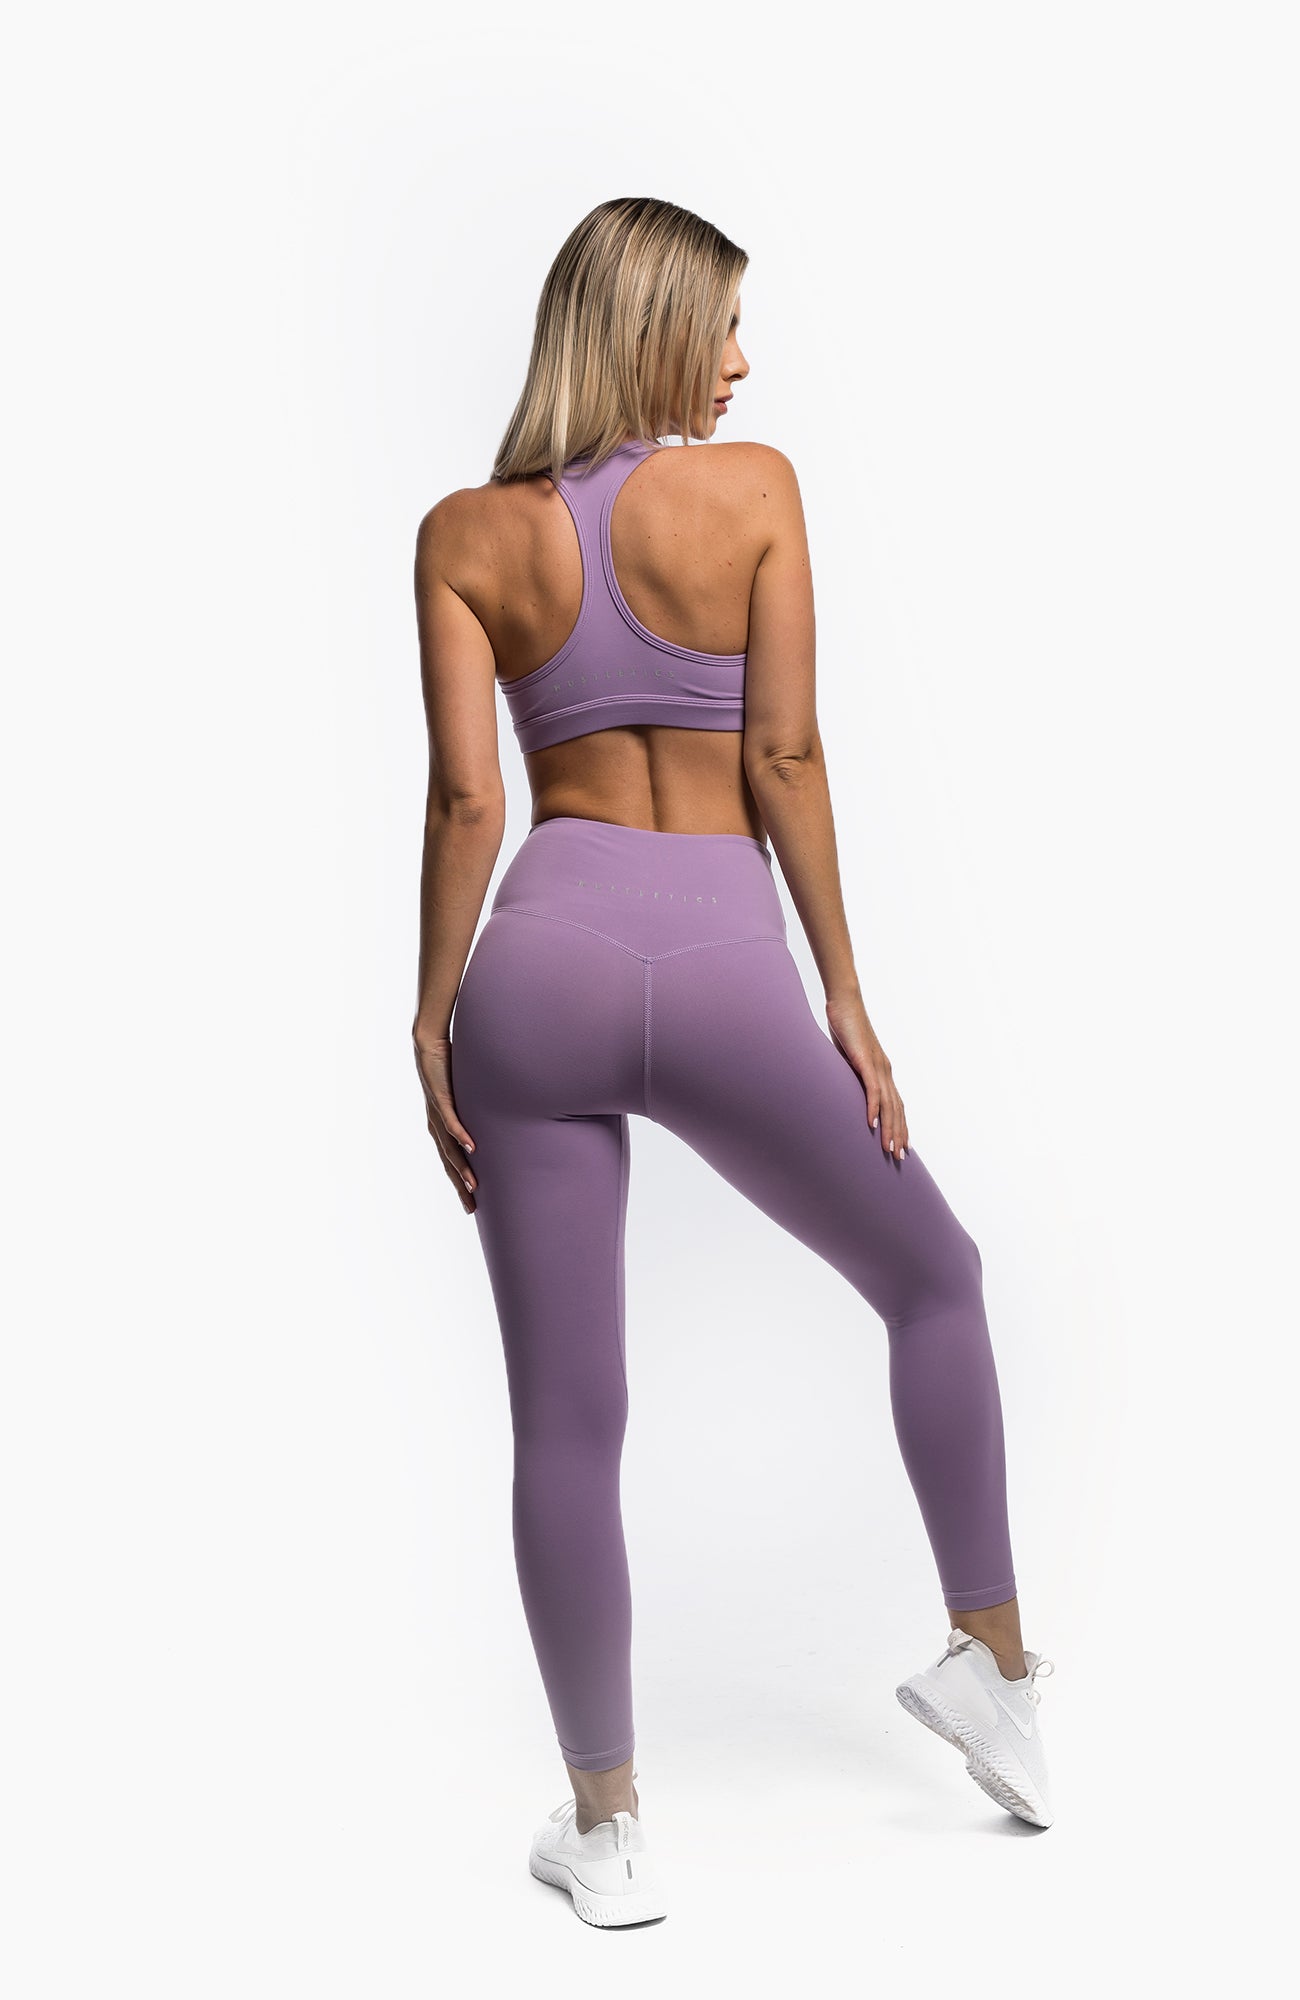 Gymshark size XS women leggings good condition Purple - $18 - From Kay